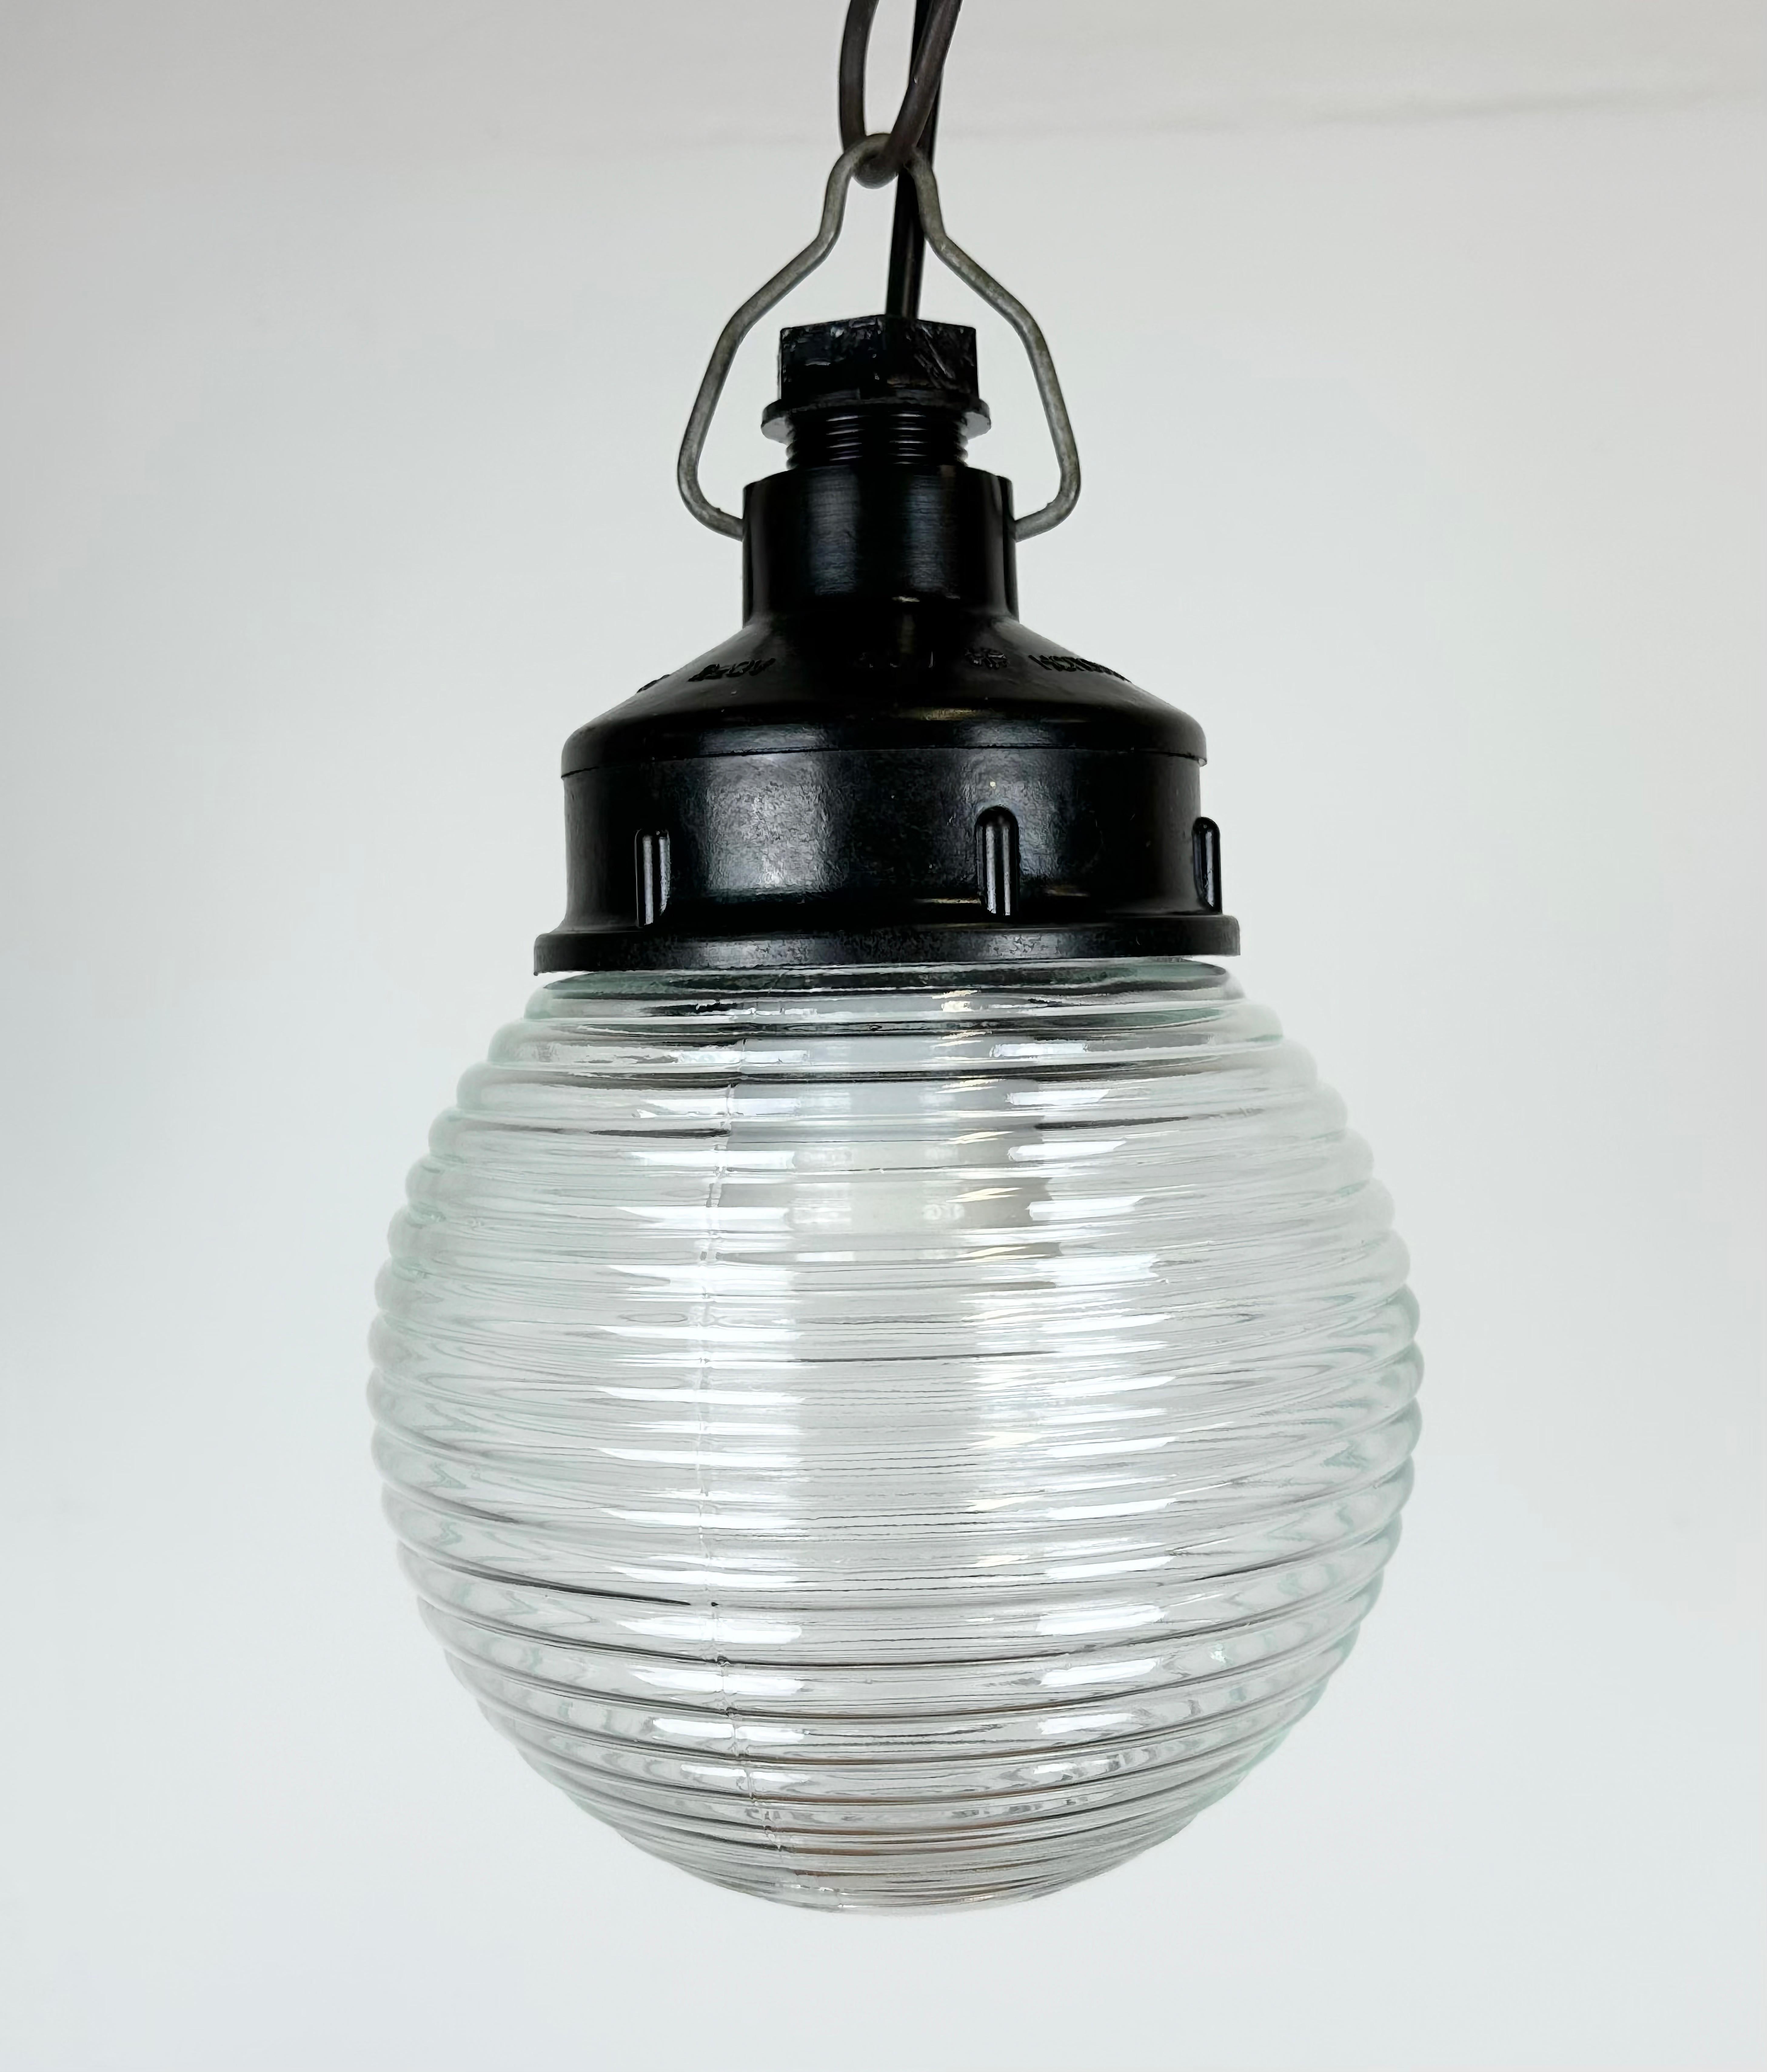 Vintage industrial light made in former Soviet Union during the 1970s. It features a brown bakelite top and a ribbed glass cover. The socket requires E27 / E26 light bulbs. New wire. The weight of the lamp is 0,8 kg.